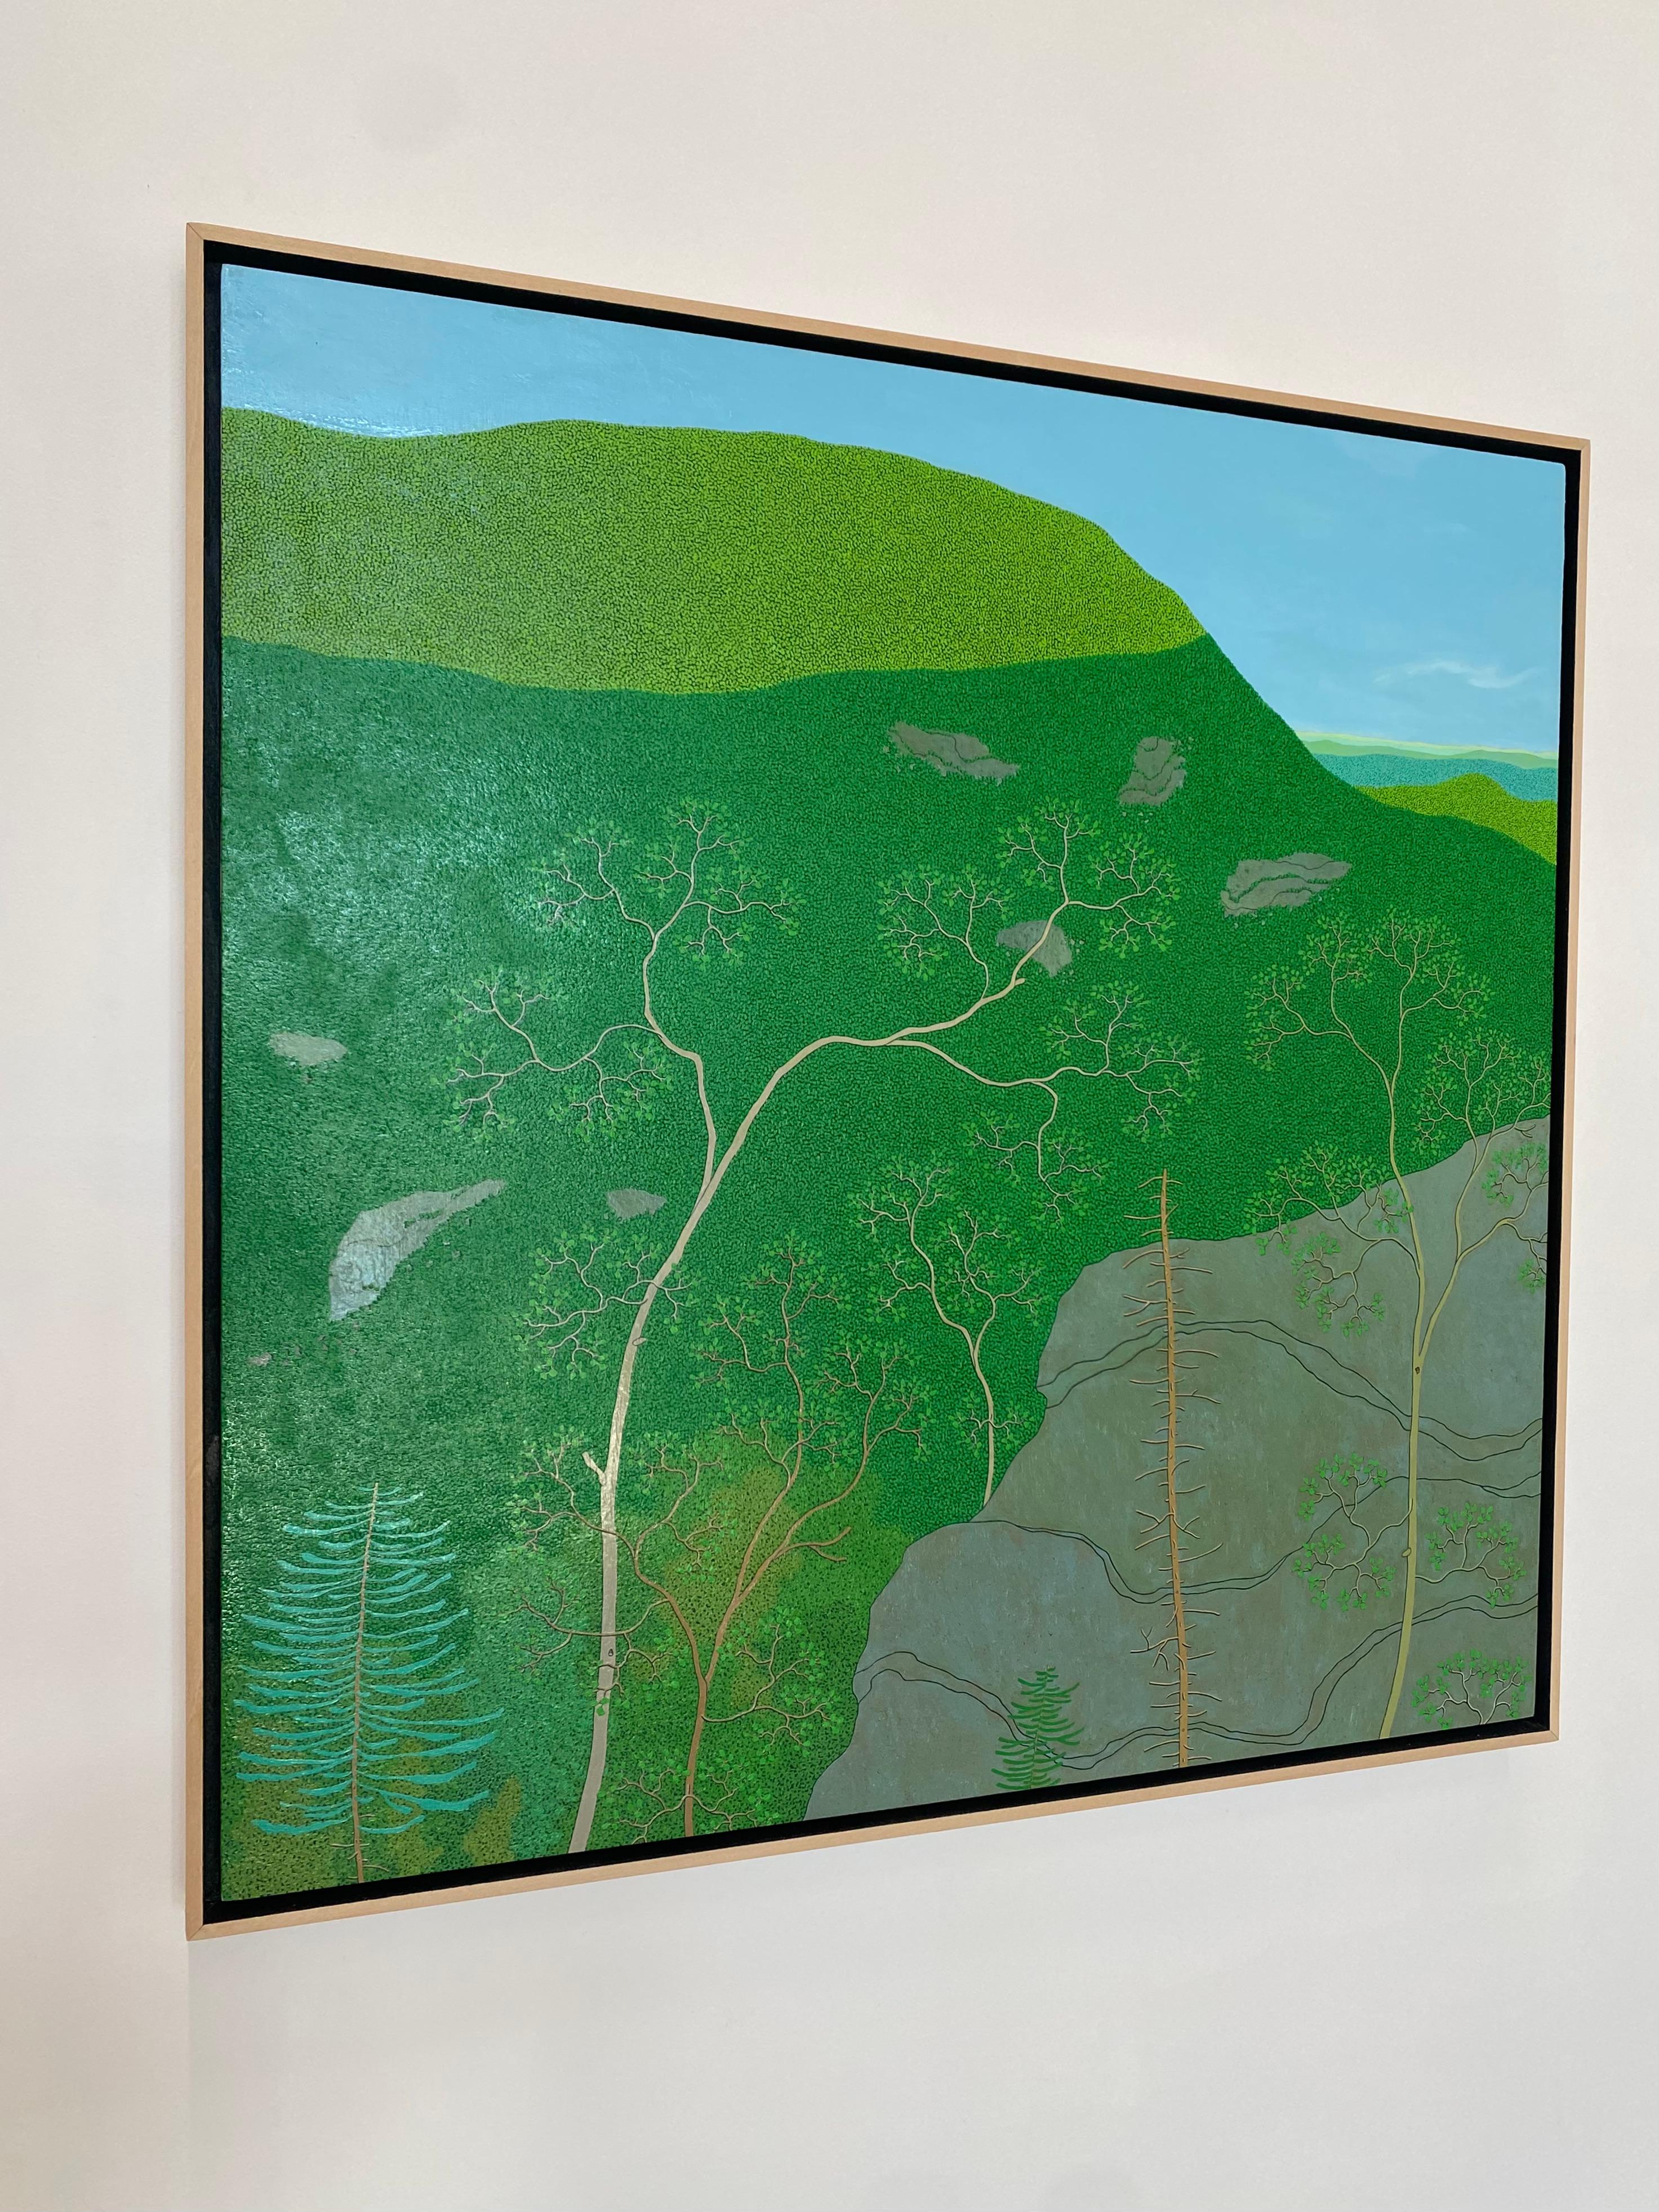 The verdant green, mountainous landscape of Gregory Hennen's Virginia home are the subject for this rich, highly detailed landscape painting. Recording the changing light from the mountain ridge, Hennen captures its many shades of green, teal, blue